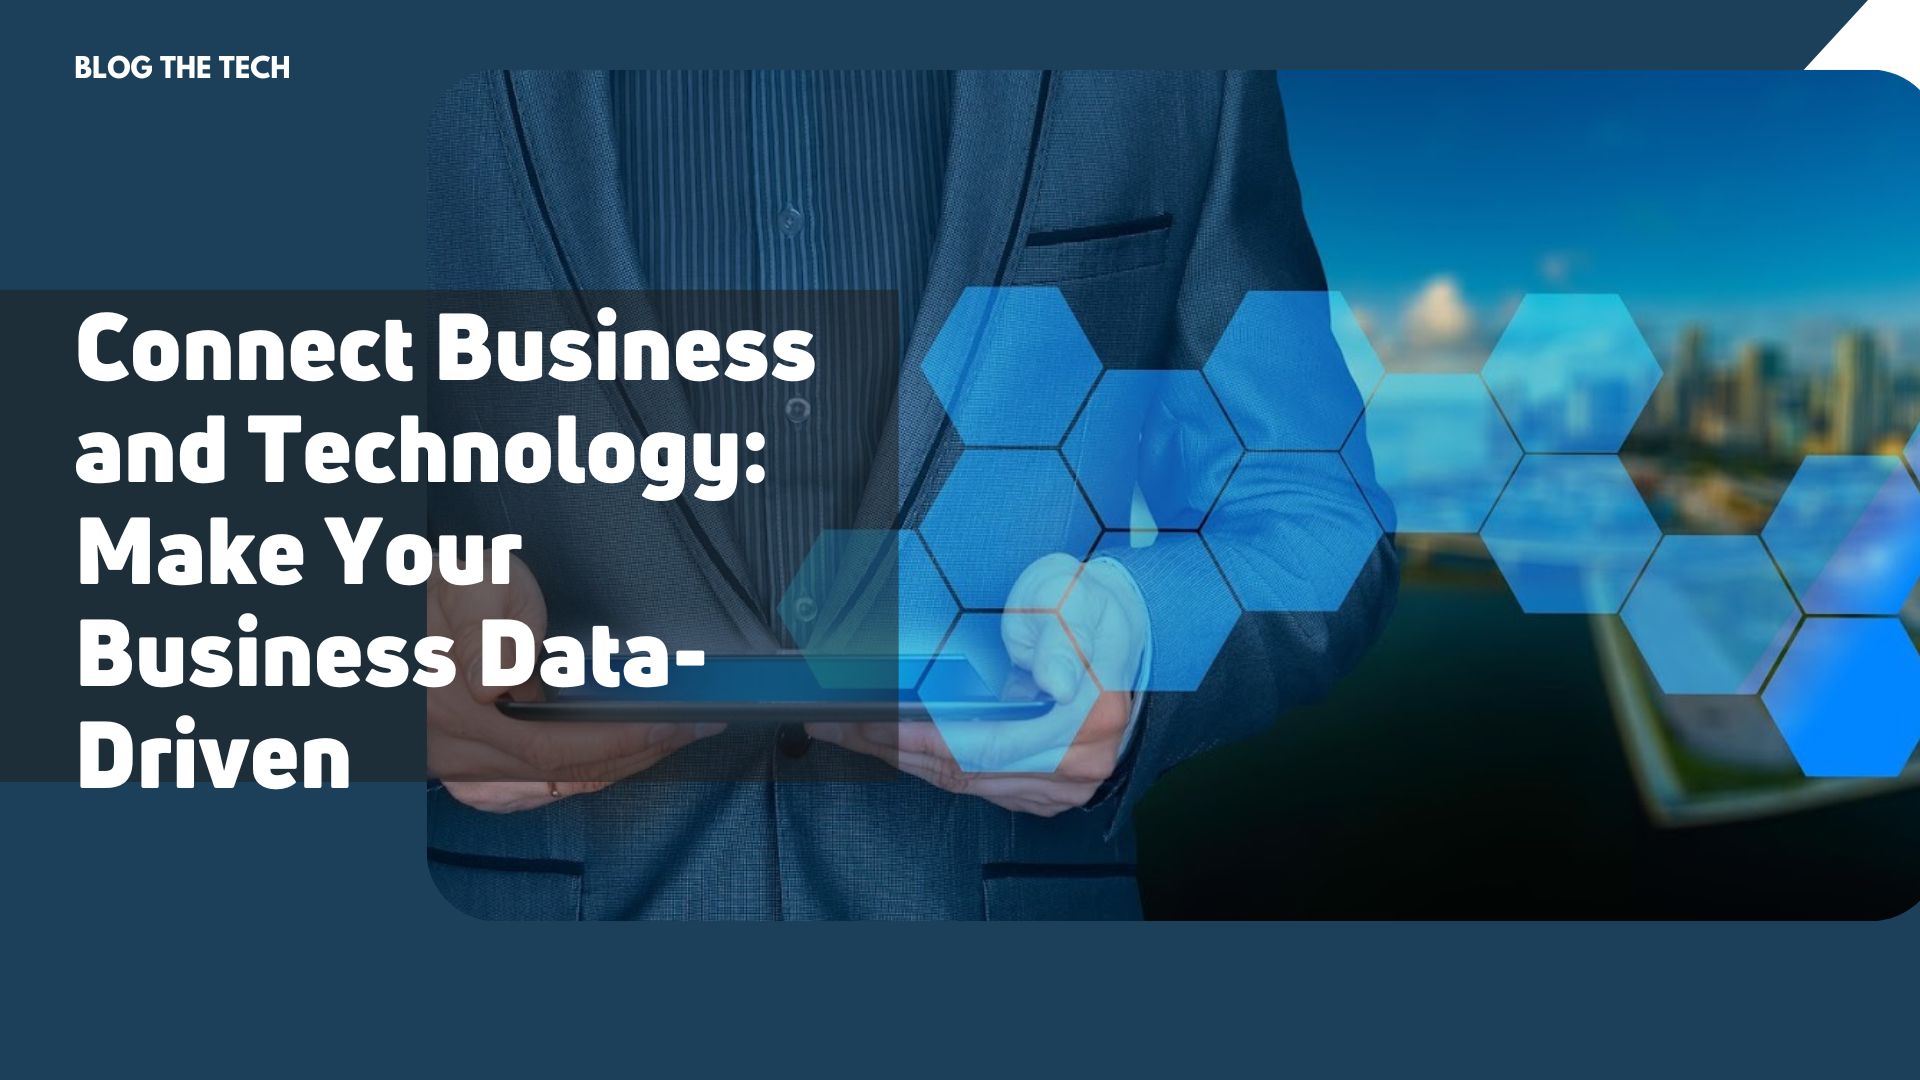 Connect Business and Technology: Make Your Business Data-Driven